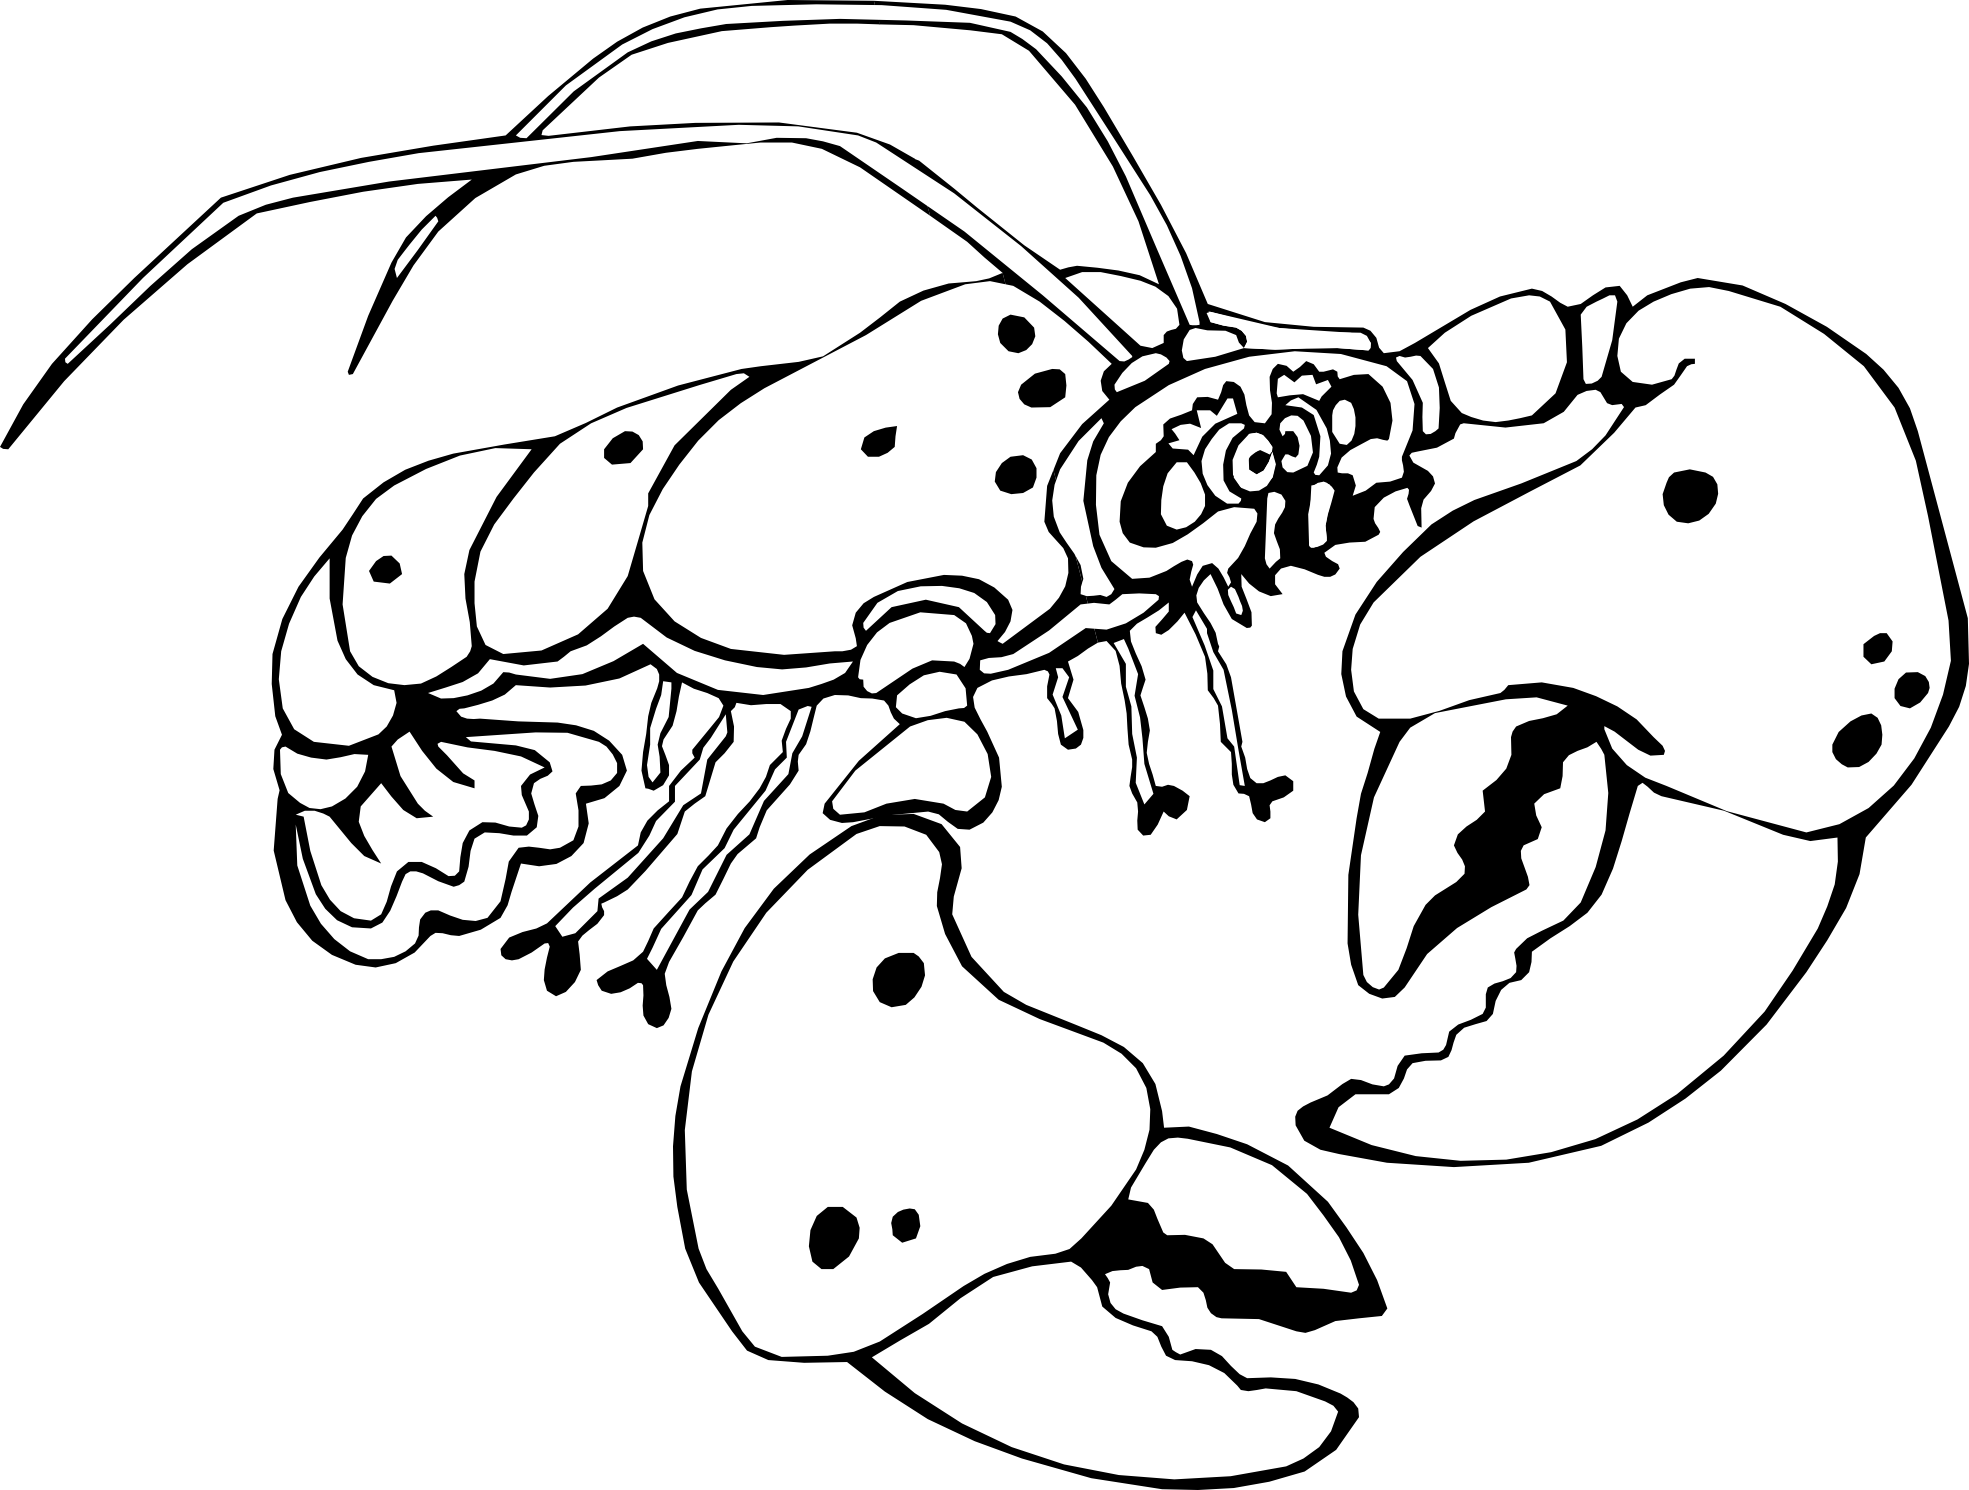 Lobster 2 black white line free clipart images